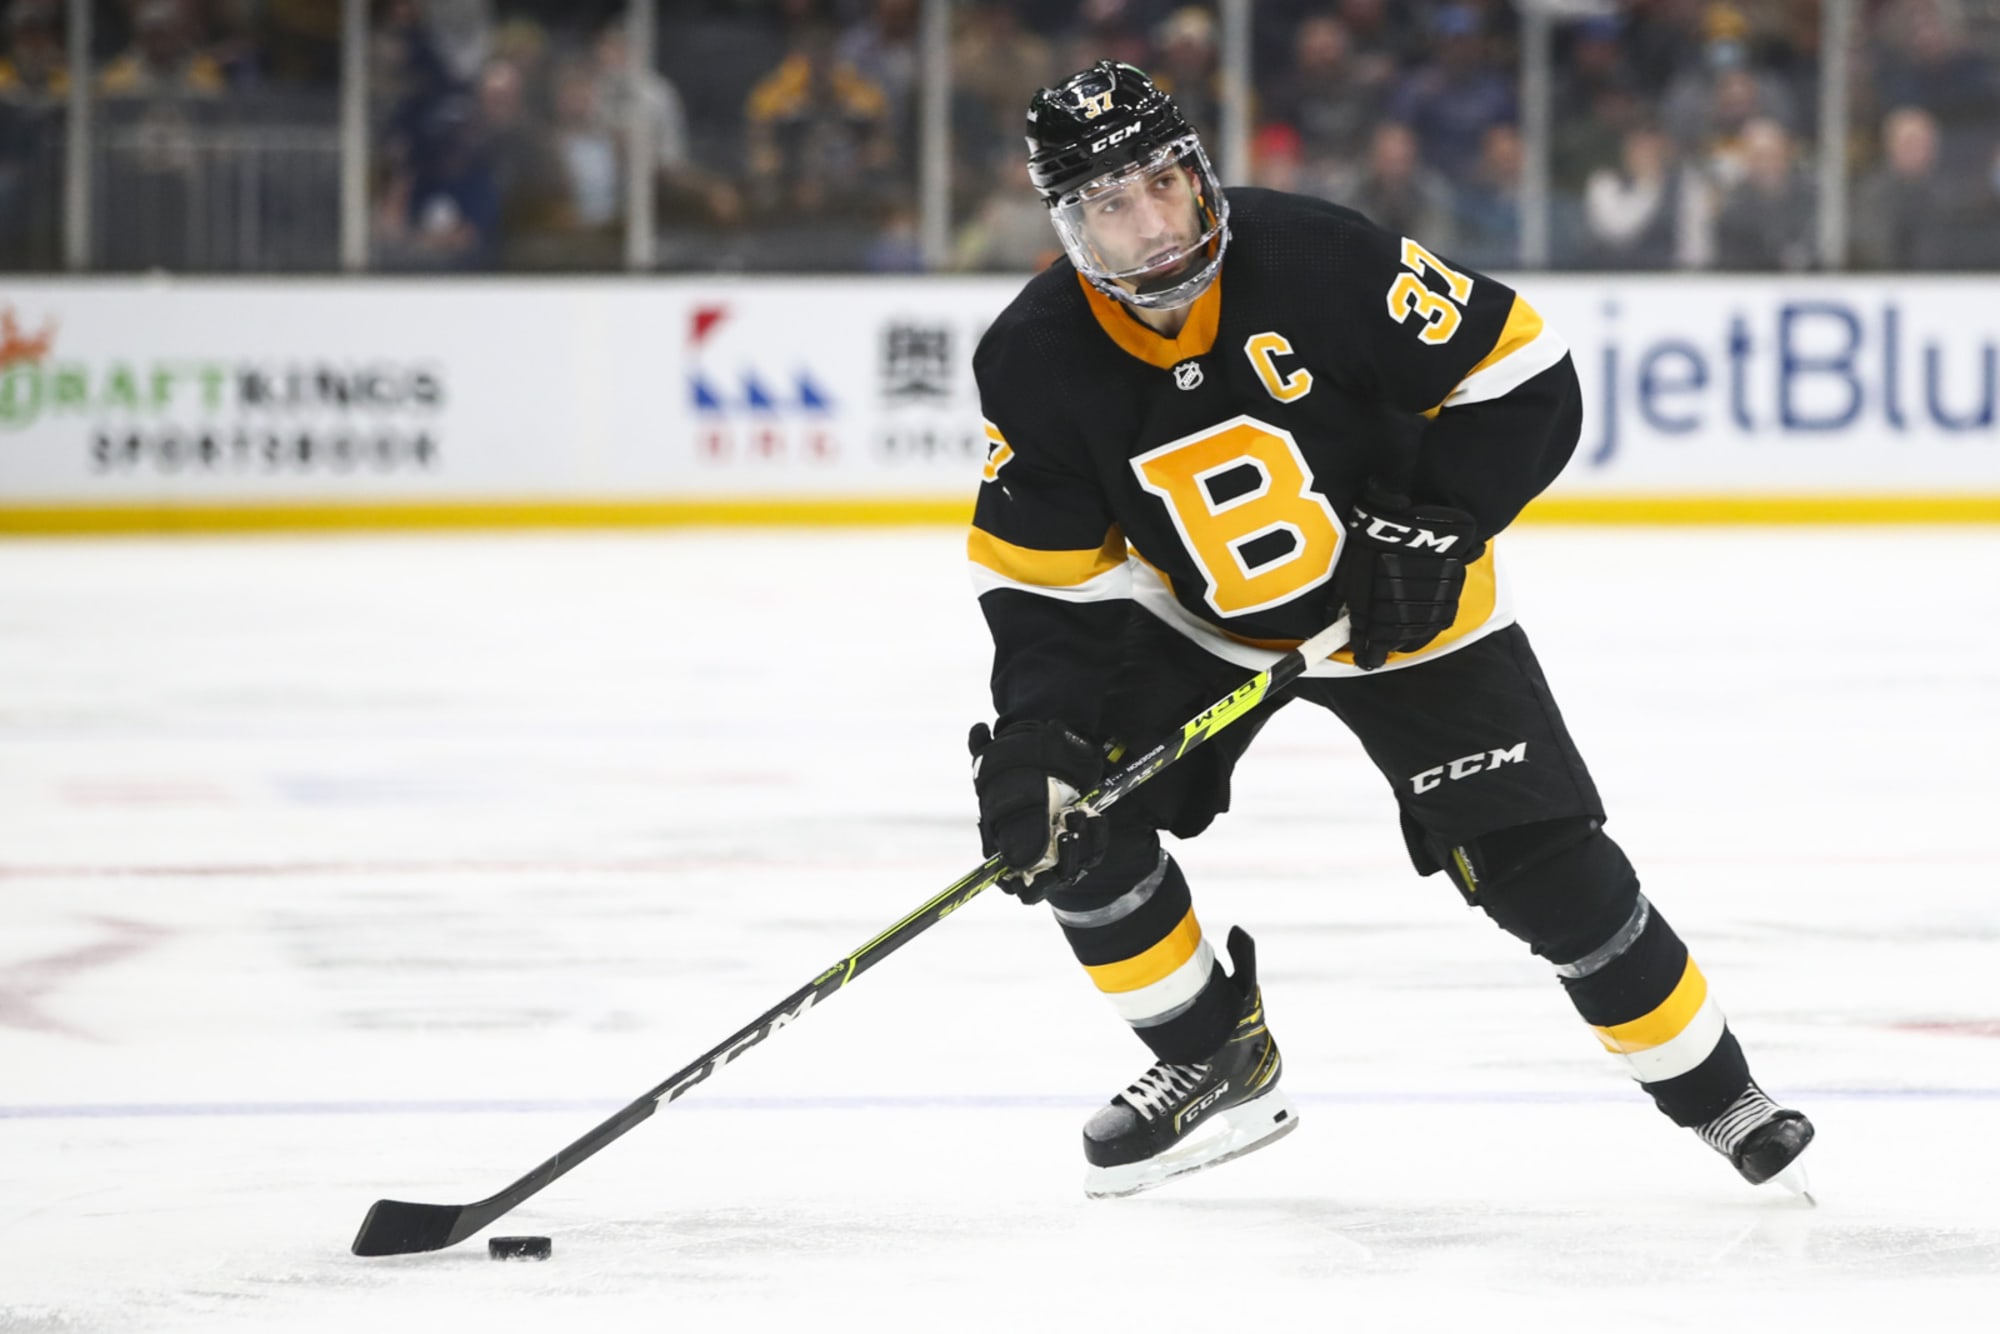 Murphy: Will Marchand Be New Bruins Captain?